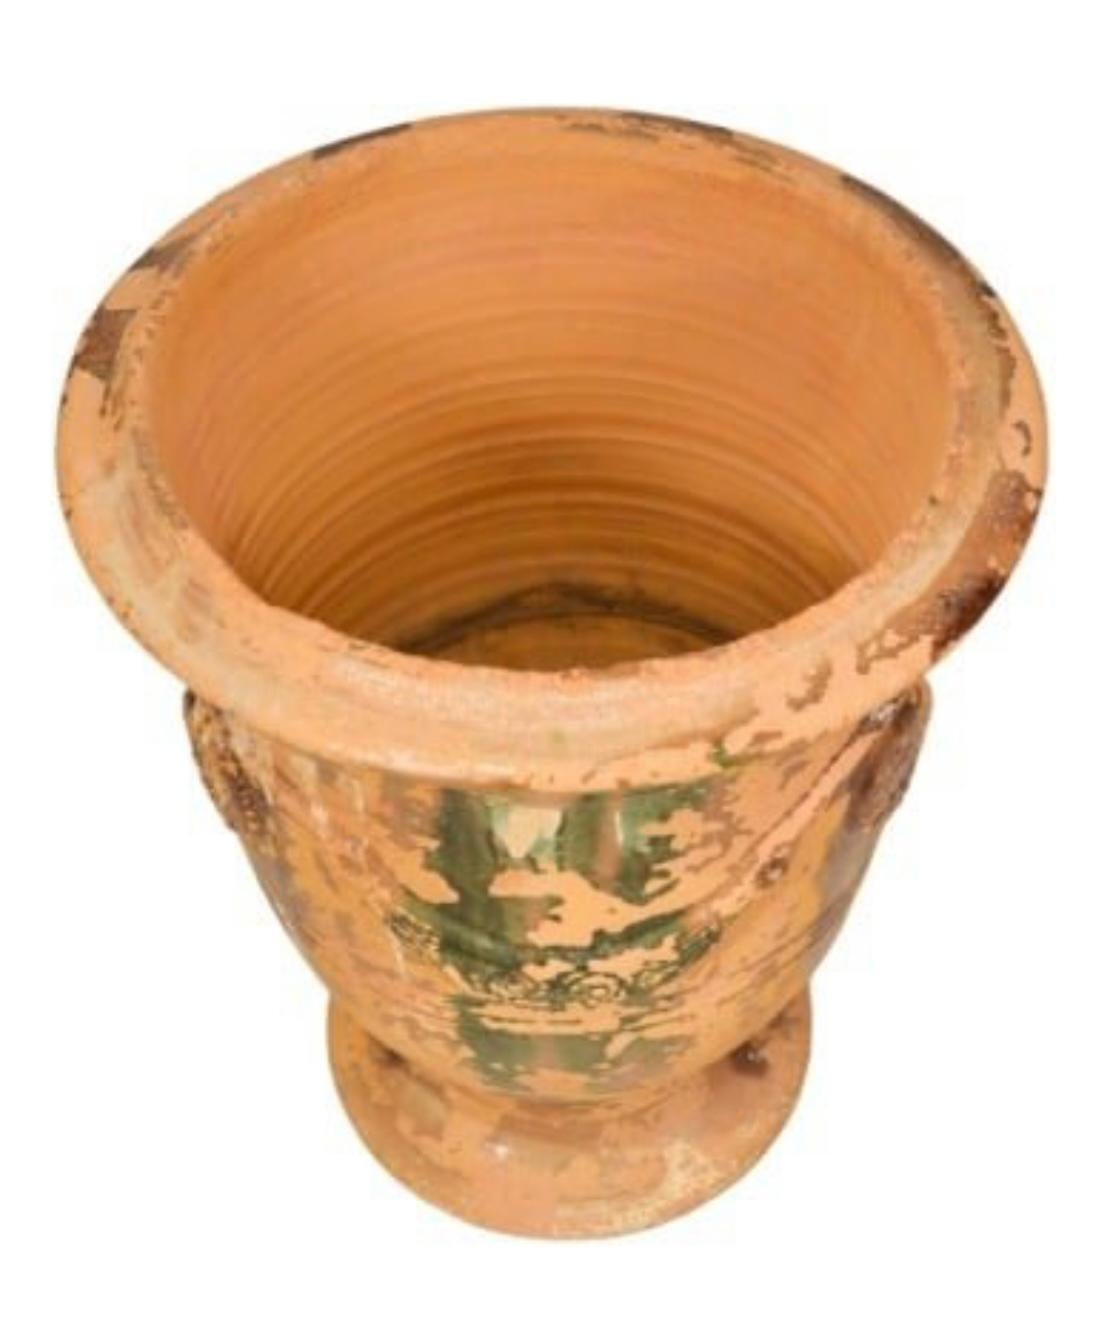 A 20th century terracotta Anduze pot in a medium size with distressed glaze. 